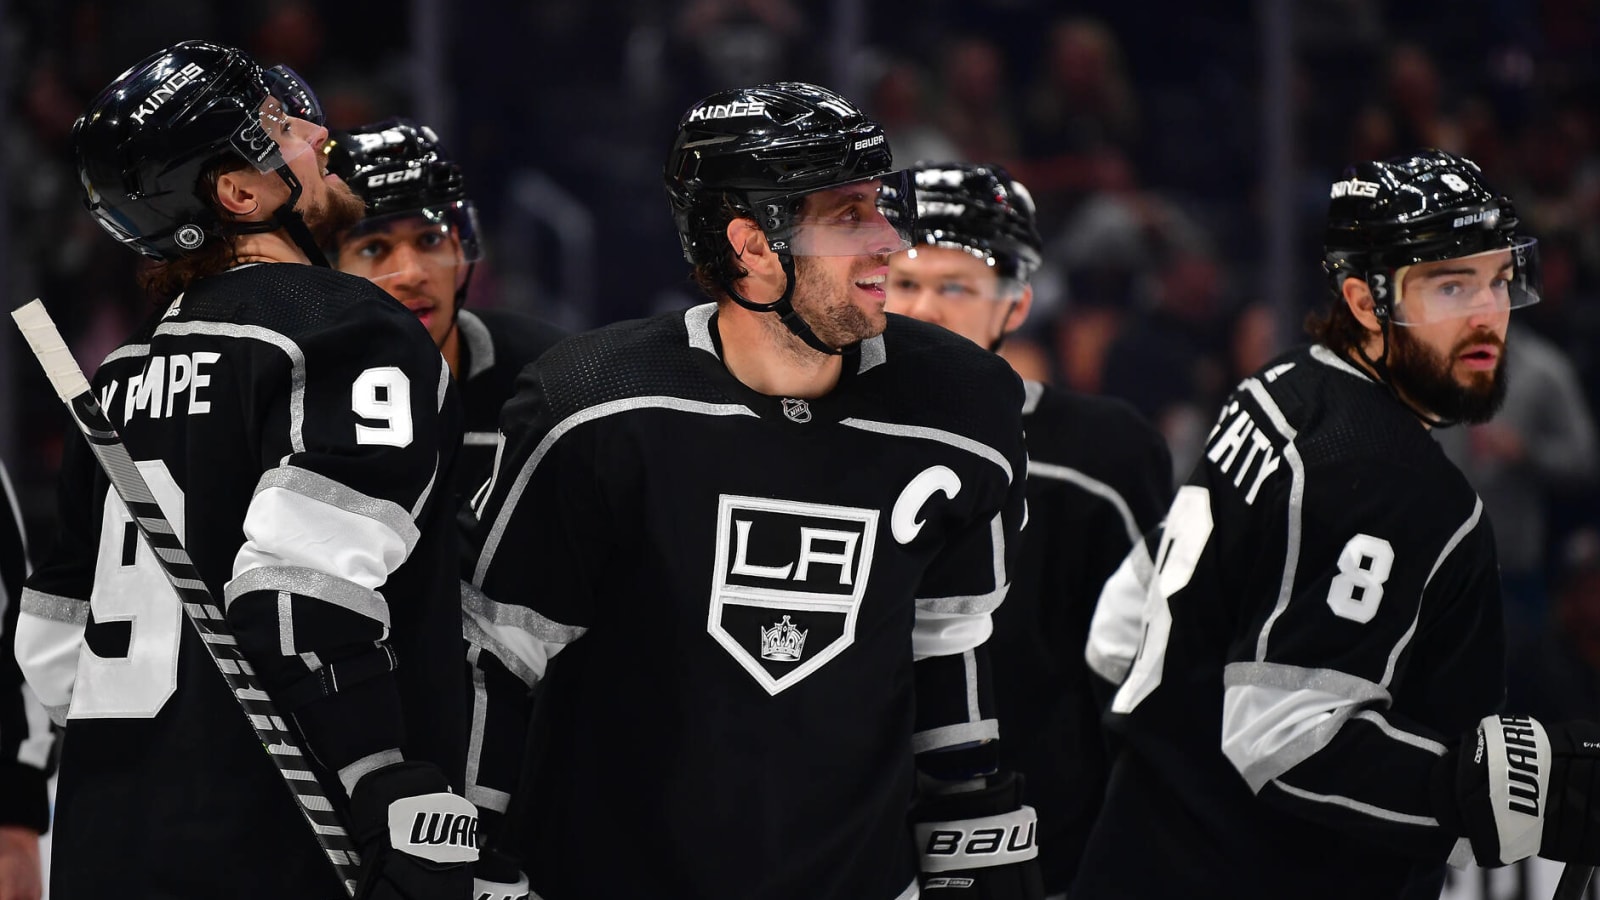 Are the Kings the best team in the Pacific Division?